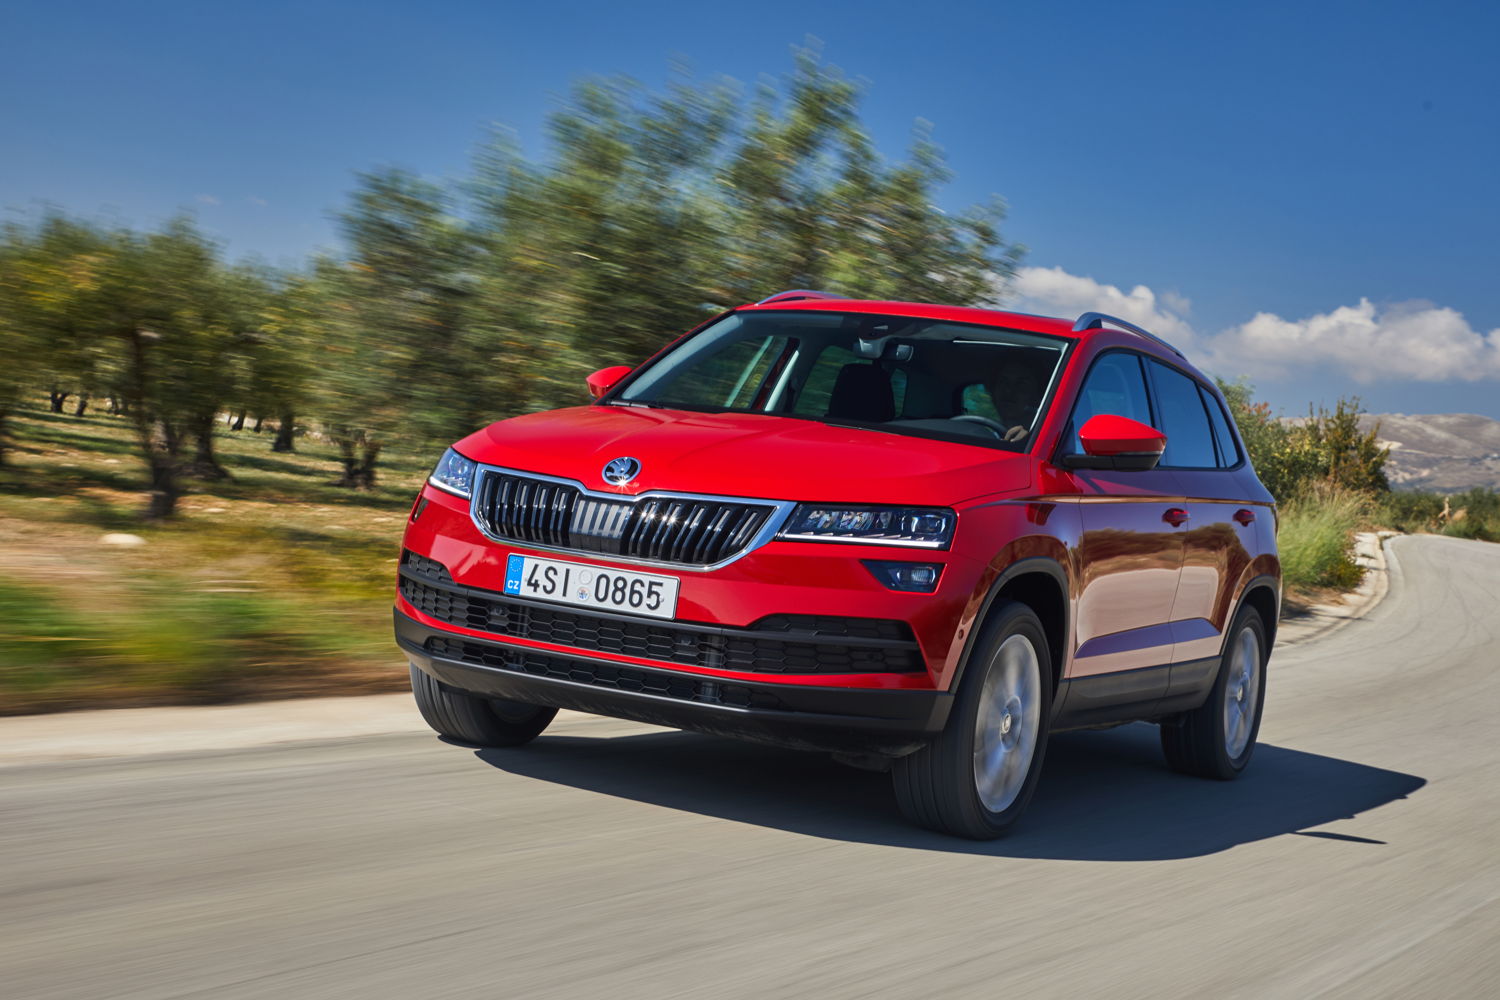 ŠKODA can look back on another record month. For the
first time in its history, the Czech car manufacturer
delivered more than 100,000 vehicles in an April.